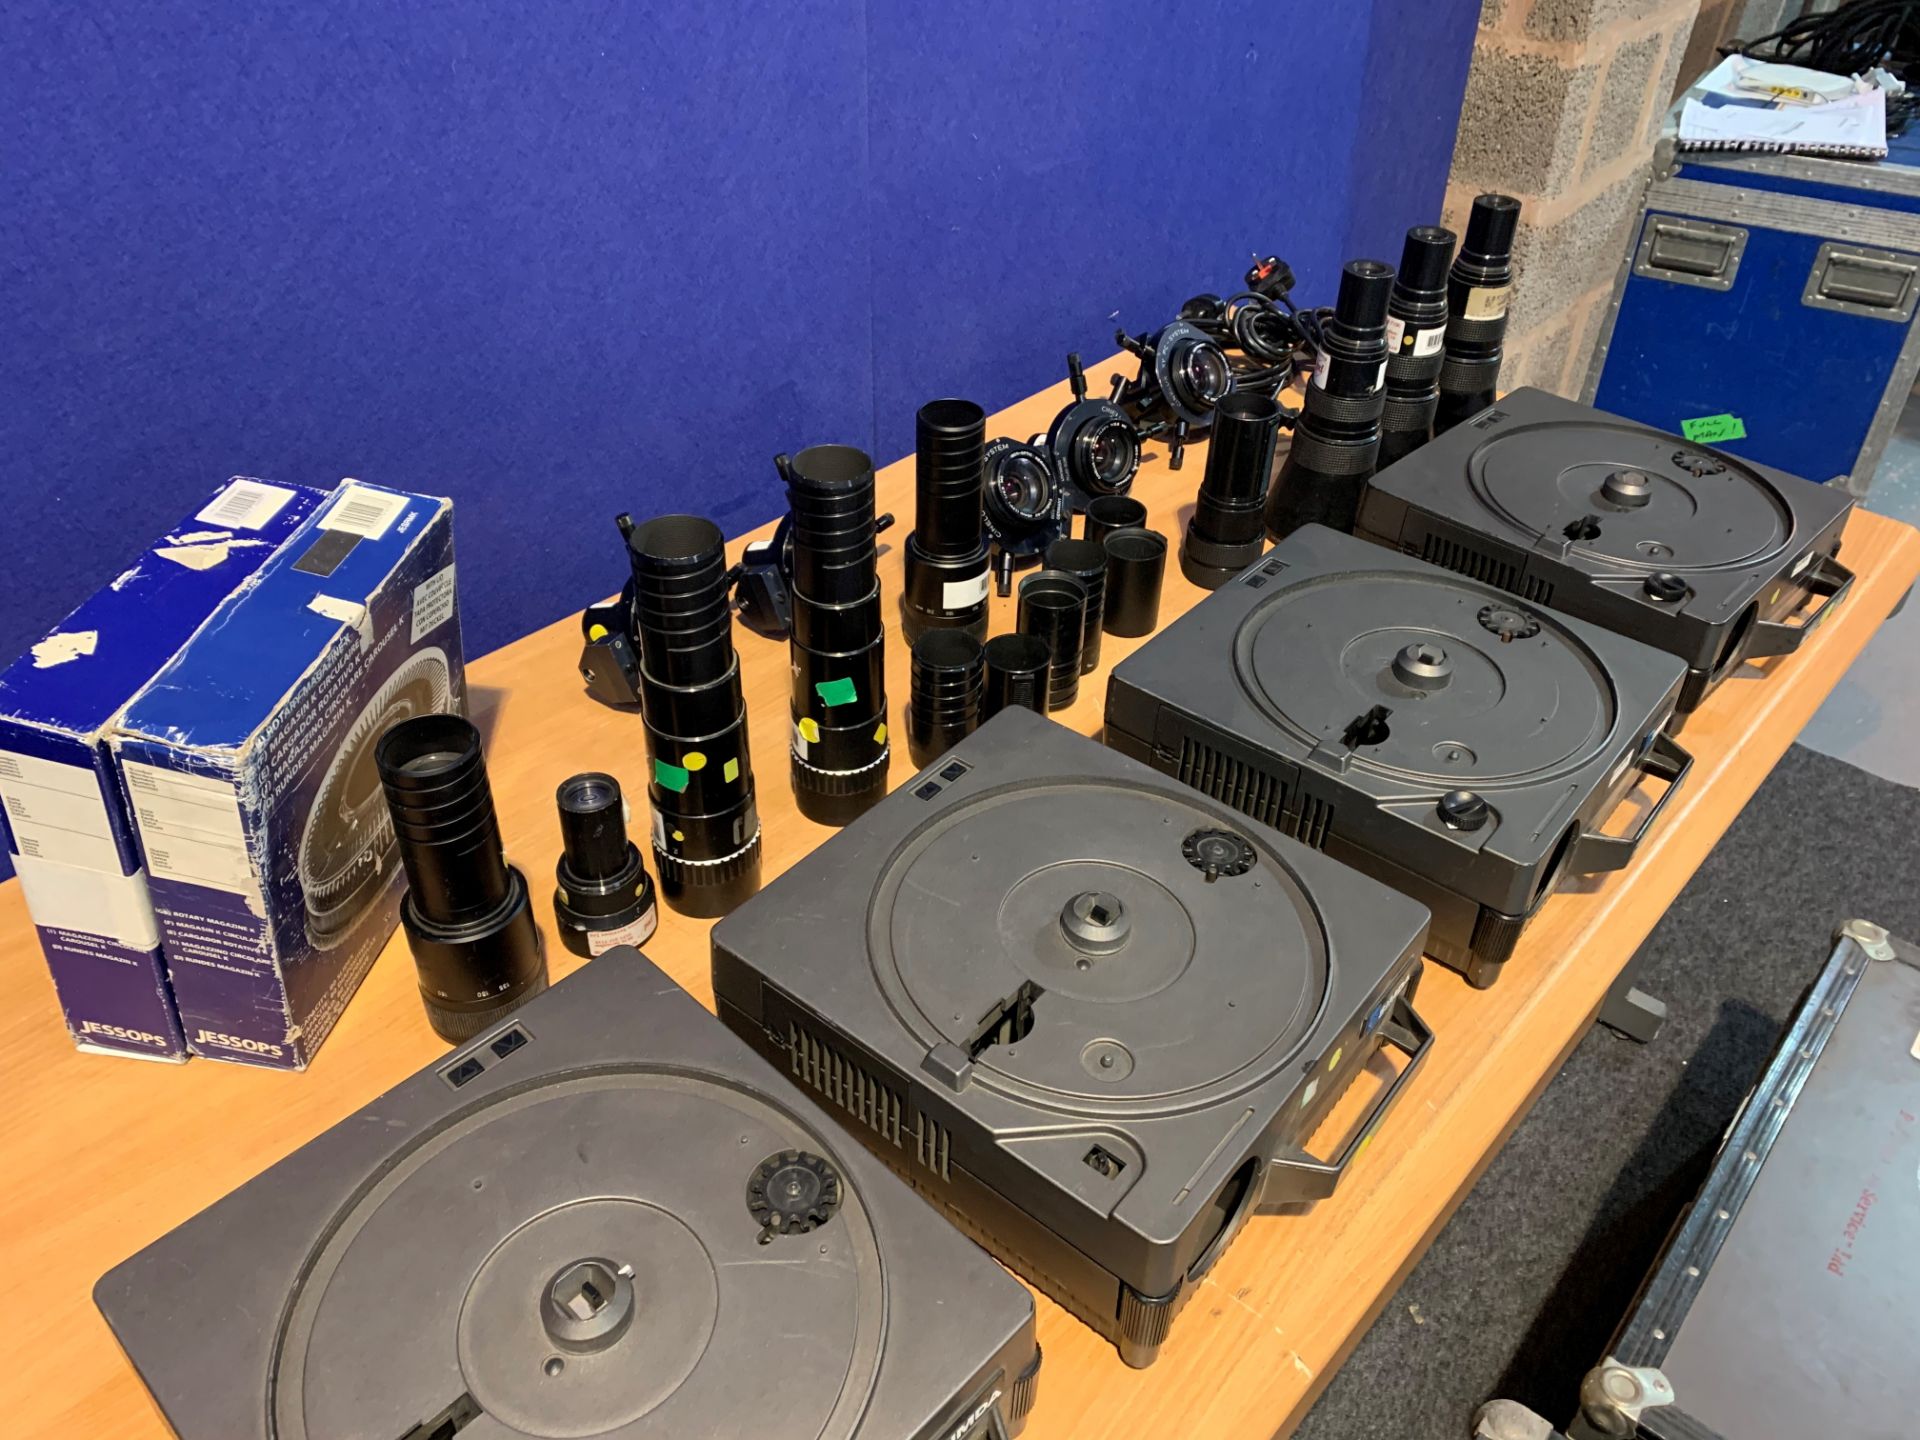 4 x 35mm 400w Simda Slide Projectors, with Lenses, Cables, Slide Trays,Remotes & 2 Flight Cases - Image 4 of 5